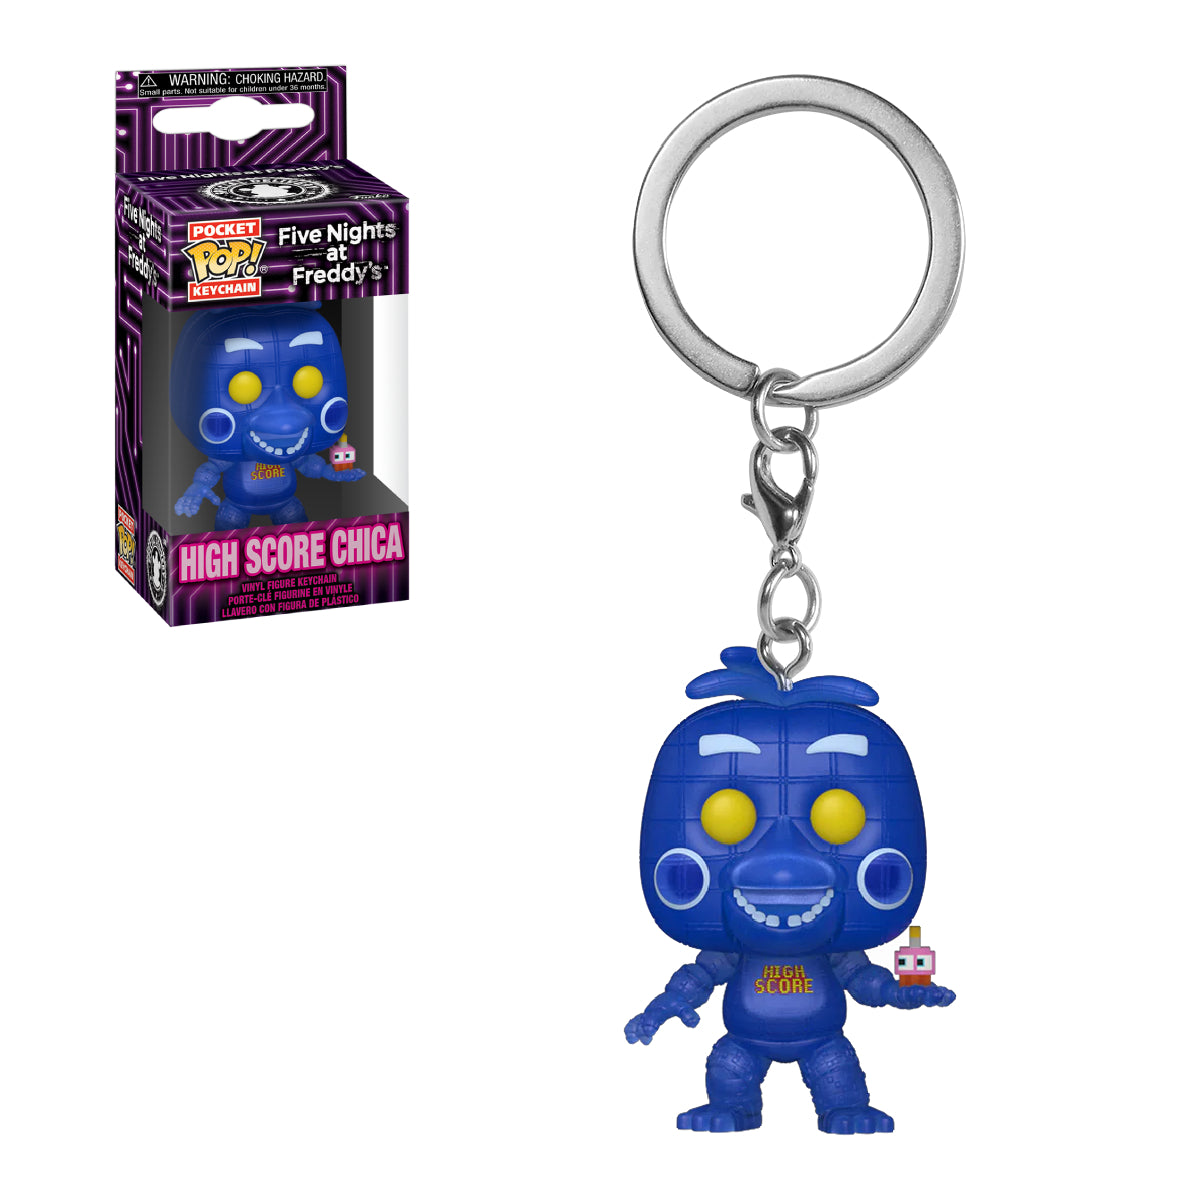 FUNKO POCKET POP KEYCHAIN GAMES FIVE NIGHTS AT FREDDYS HIGH SCORE CHICA